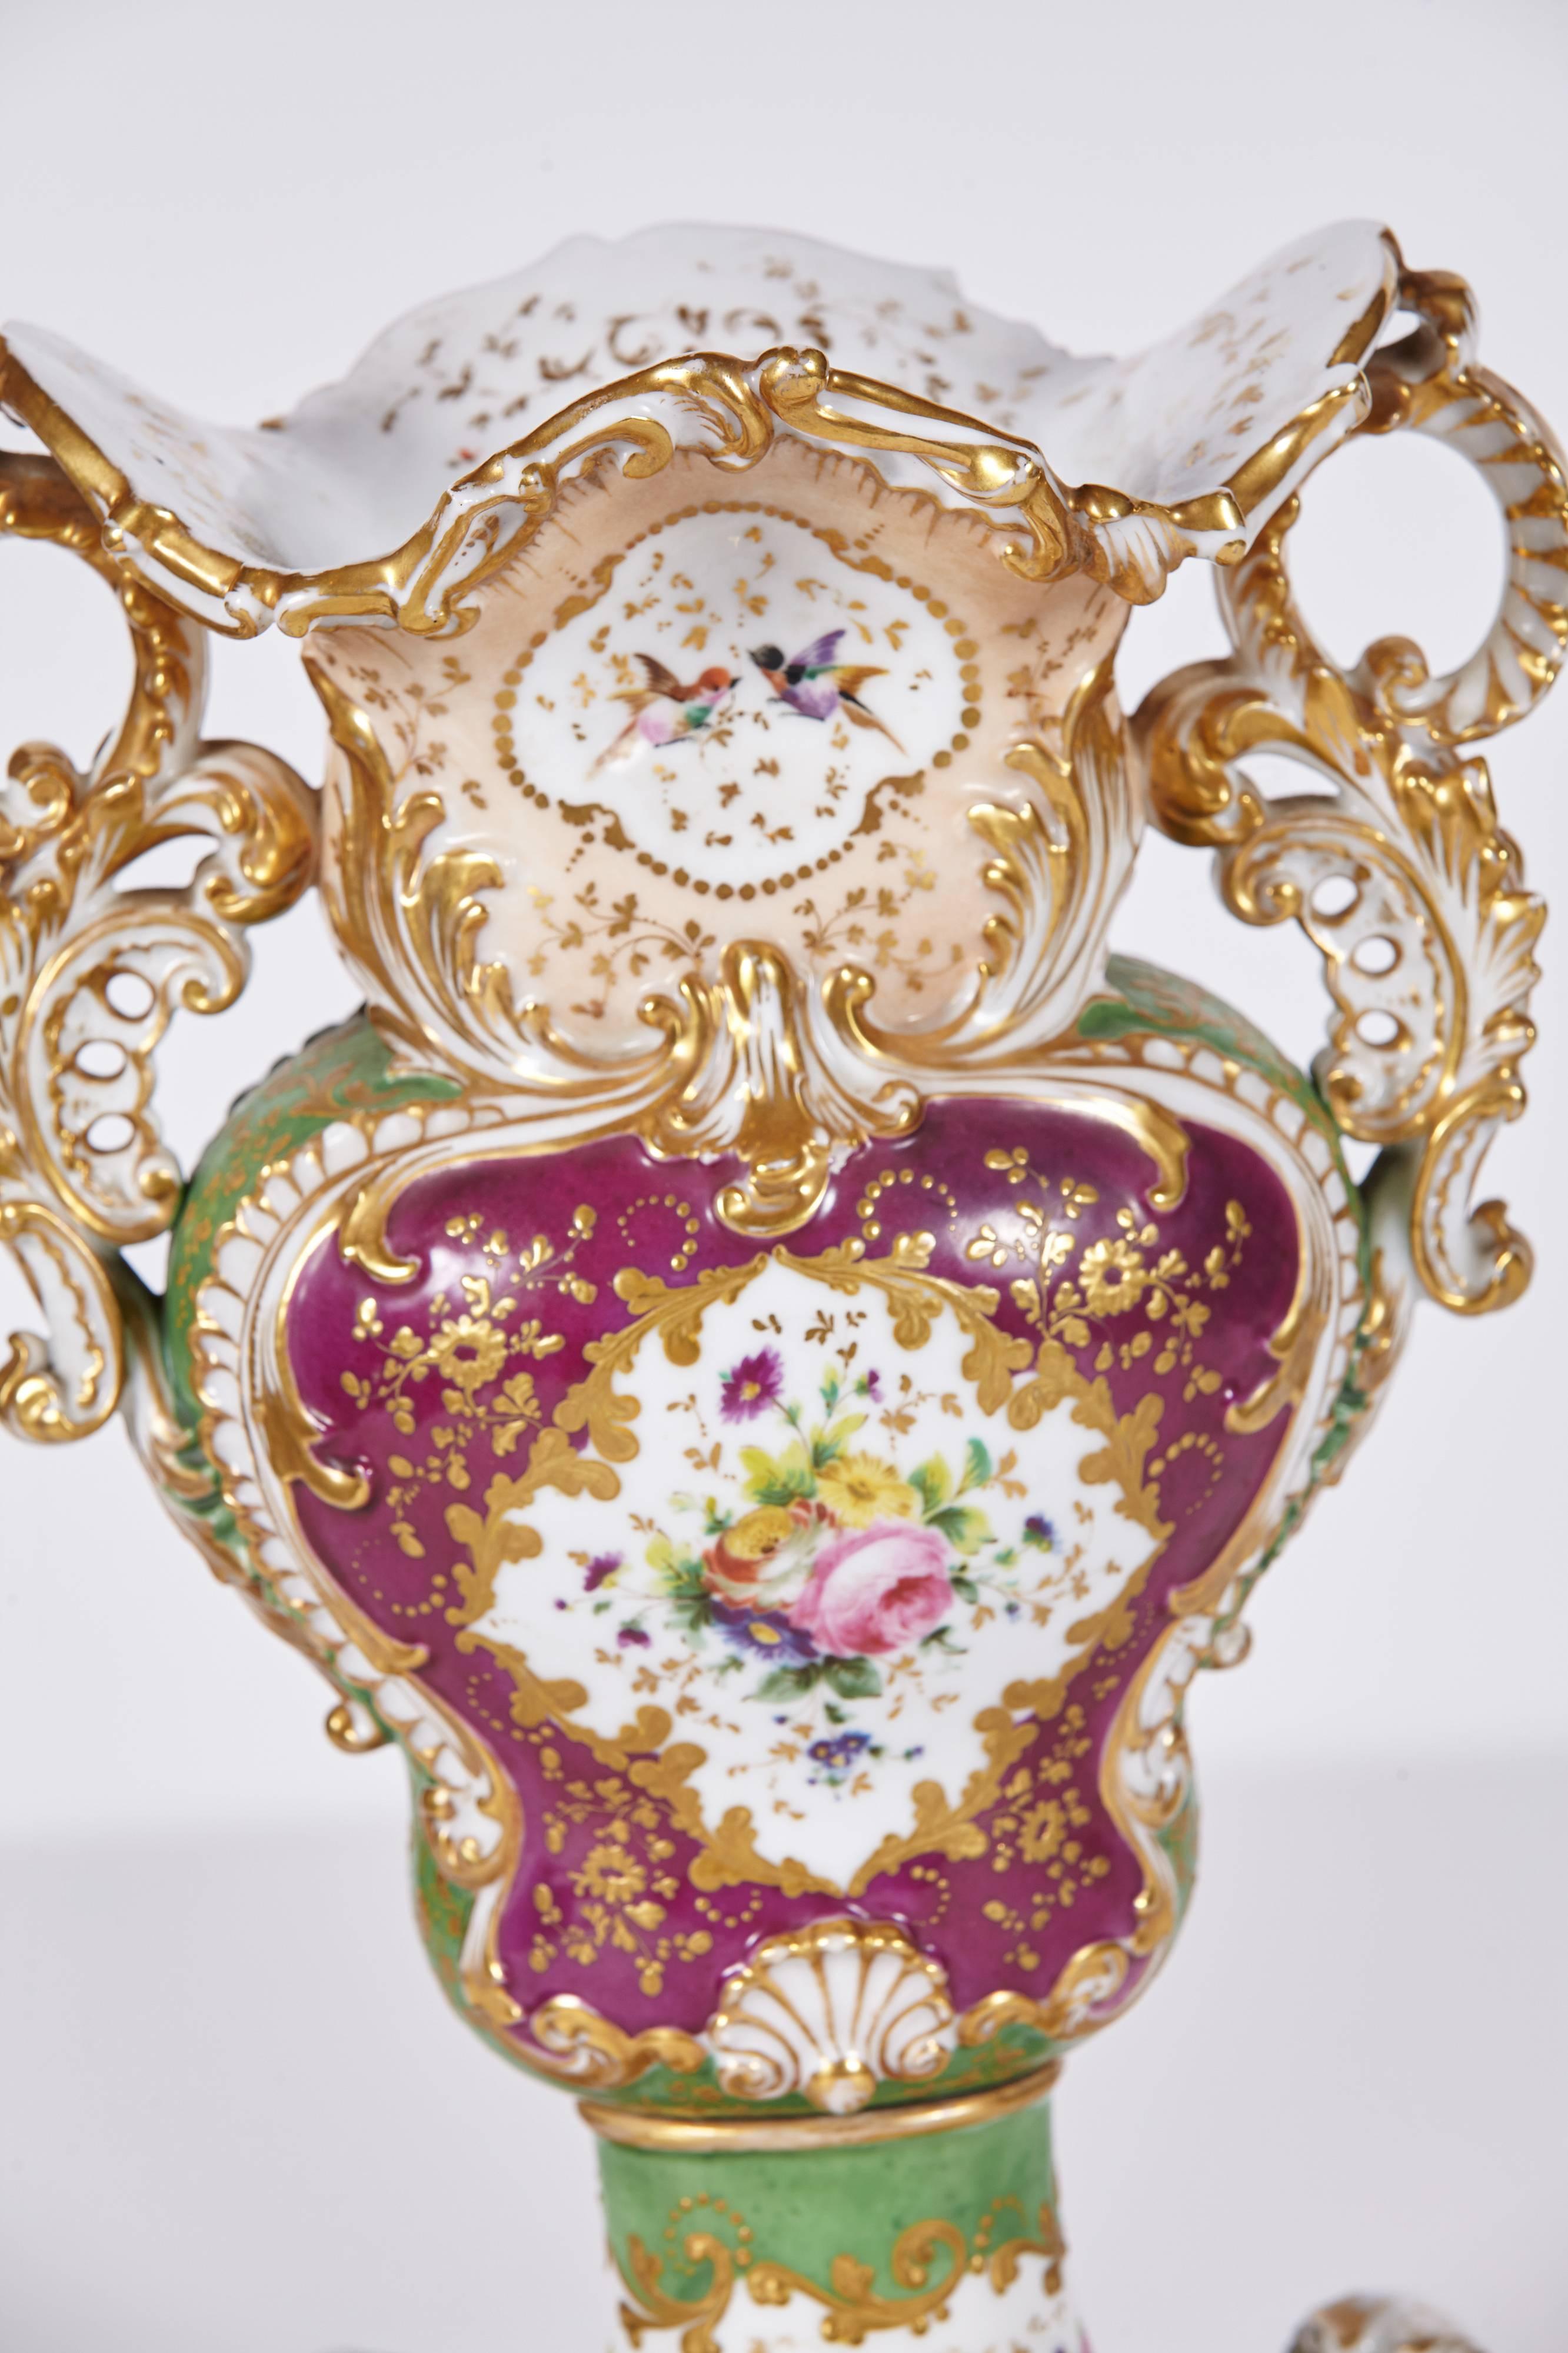 Beautiful pair of Old Paris porcelain vases signed by Jacob Petit. Rococo style vases in tones of purple, green, and dusty pink mounted with original threaded brass bolts onto matching plinths. Reserves hand-painted with birds and flowers and